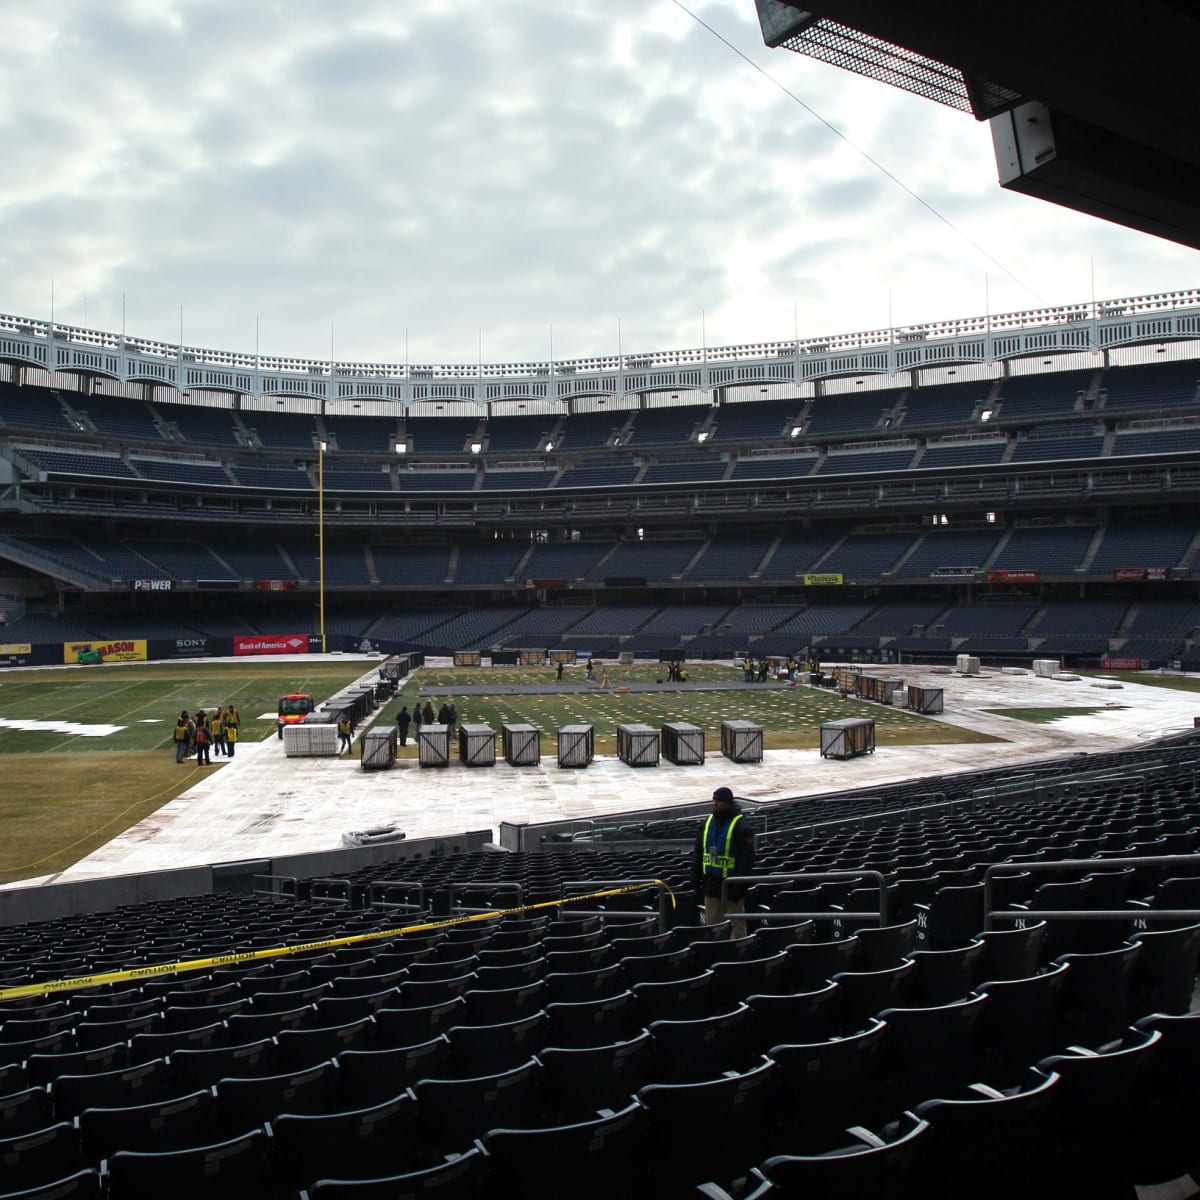 Yankees roasted for celebrating 100th anniversary of ballpark that opened  in 2009